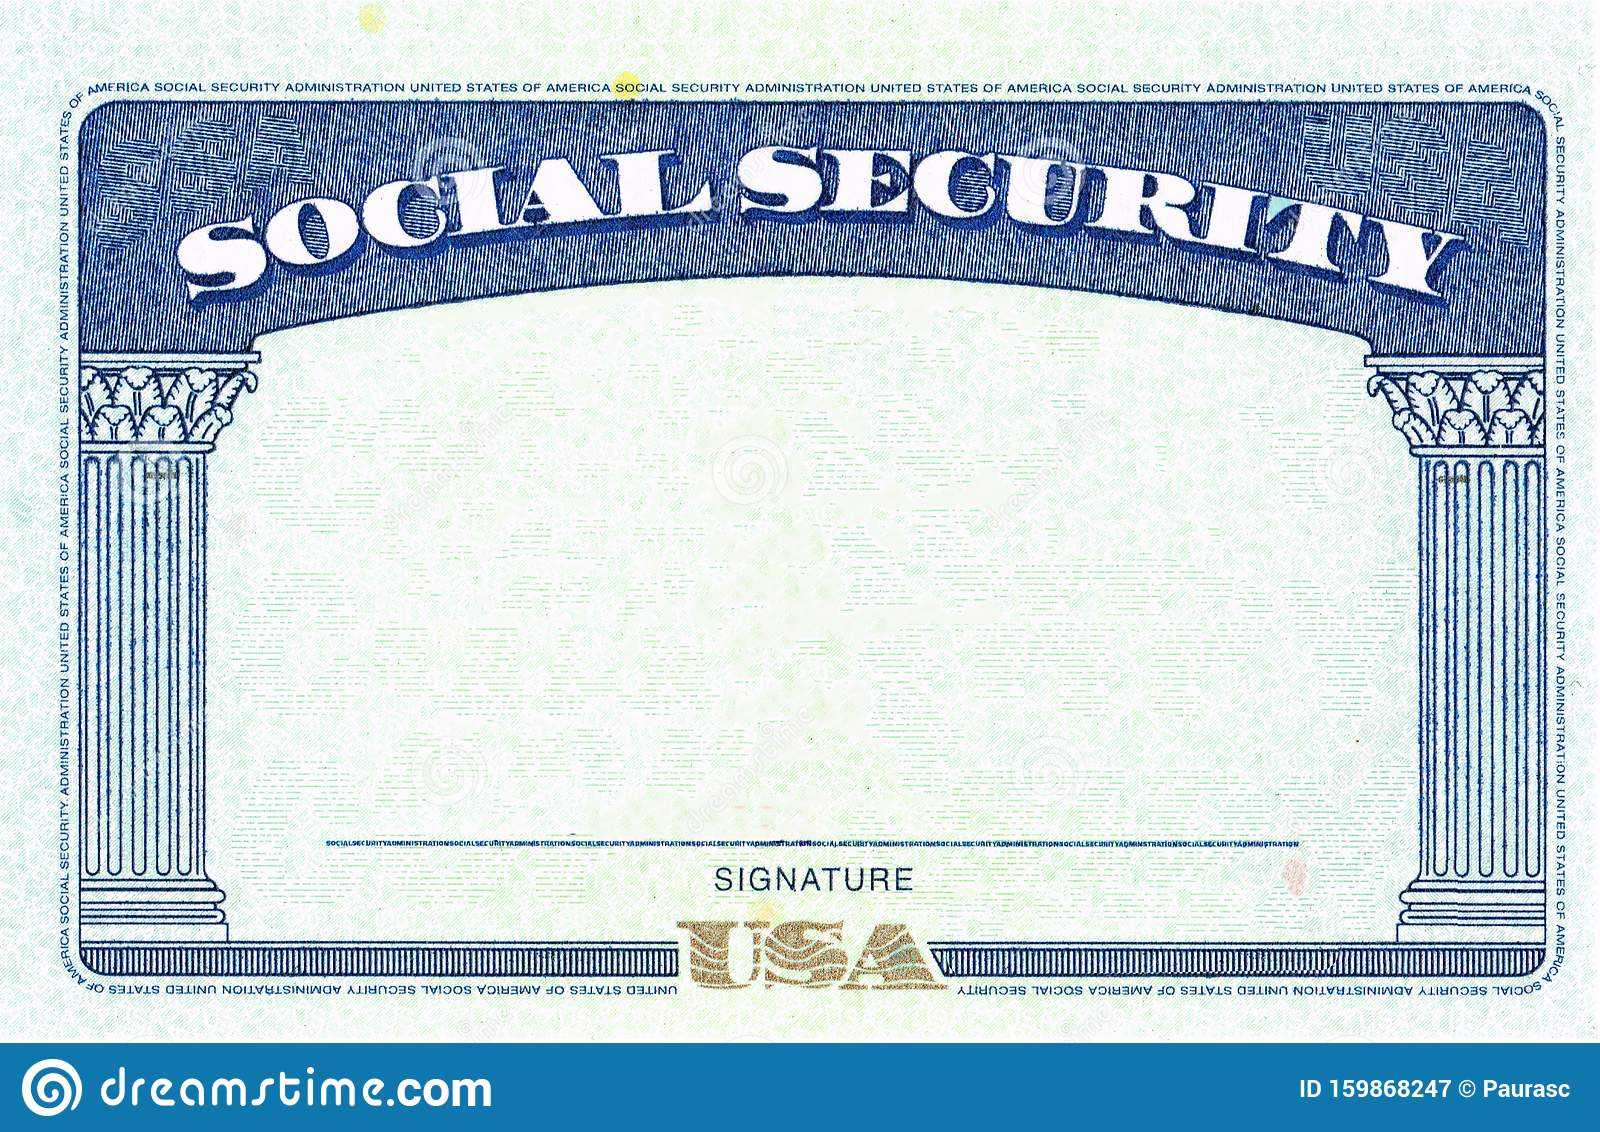 Social Security Card Blank Stock Image. Image Of Emigration Intended For Blank Social Security Card Template